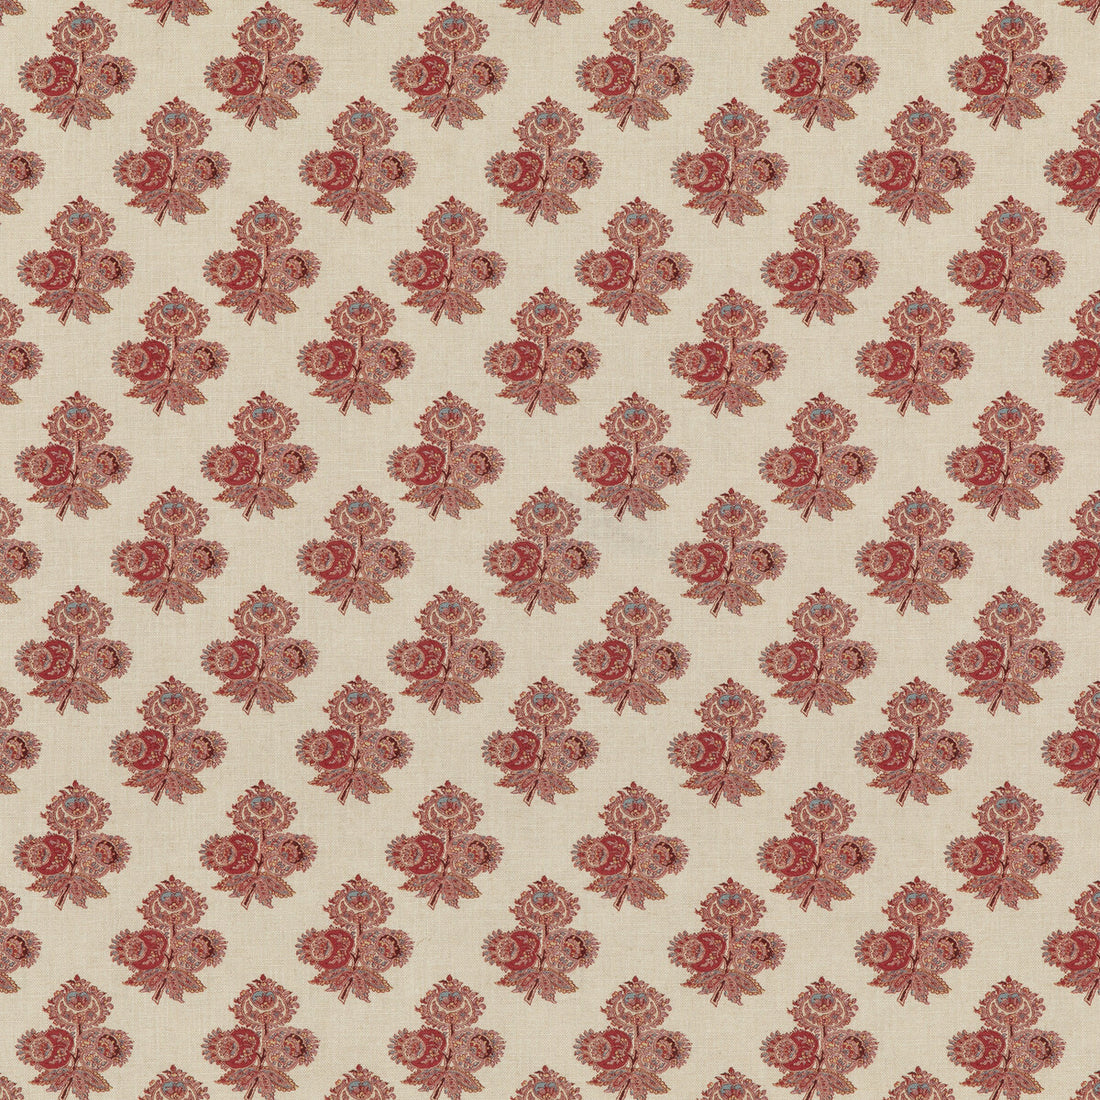 Poppy Paisley fabric in red color - pattern BP10823.1.0 - by G P &amp; J Baker in the Coromandel Small Prints collection